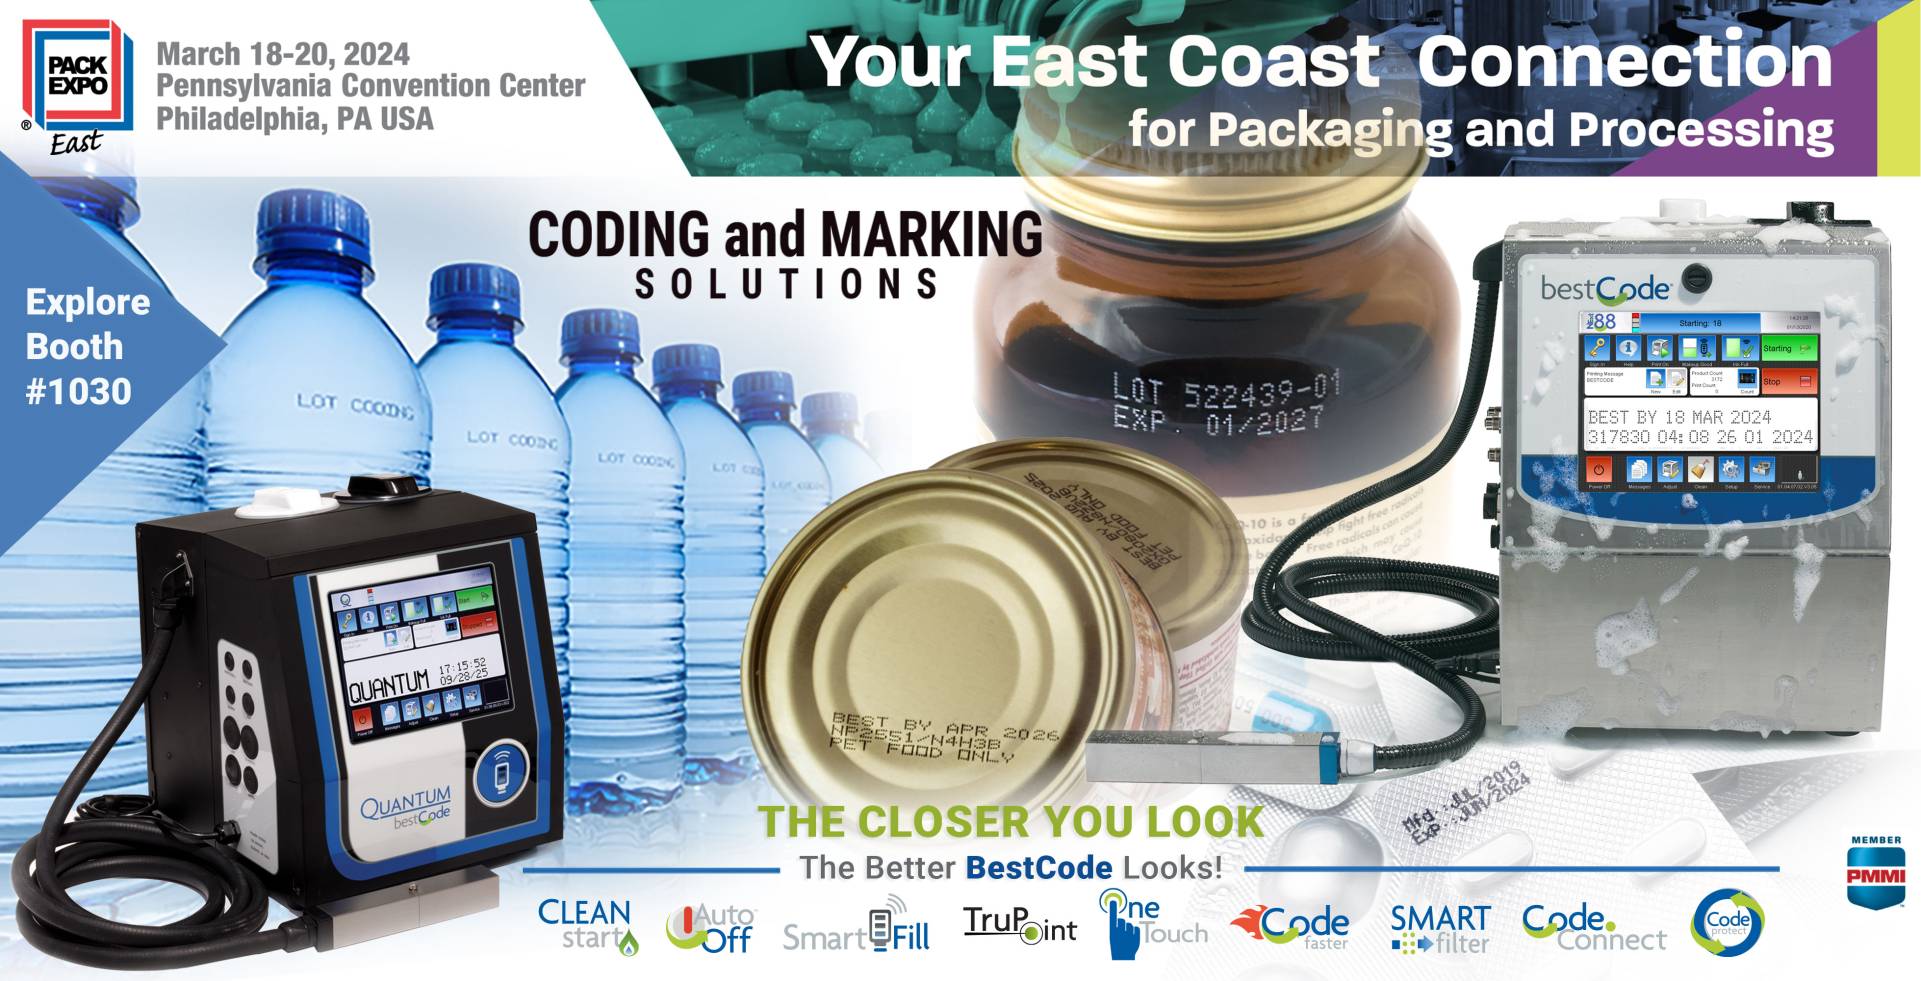 BestCode at Pack Expo East  Booth 1030